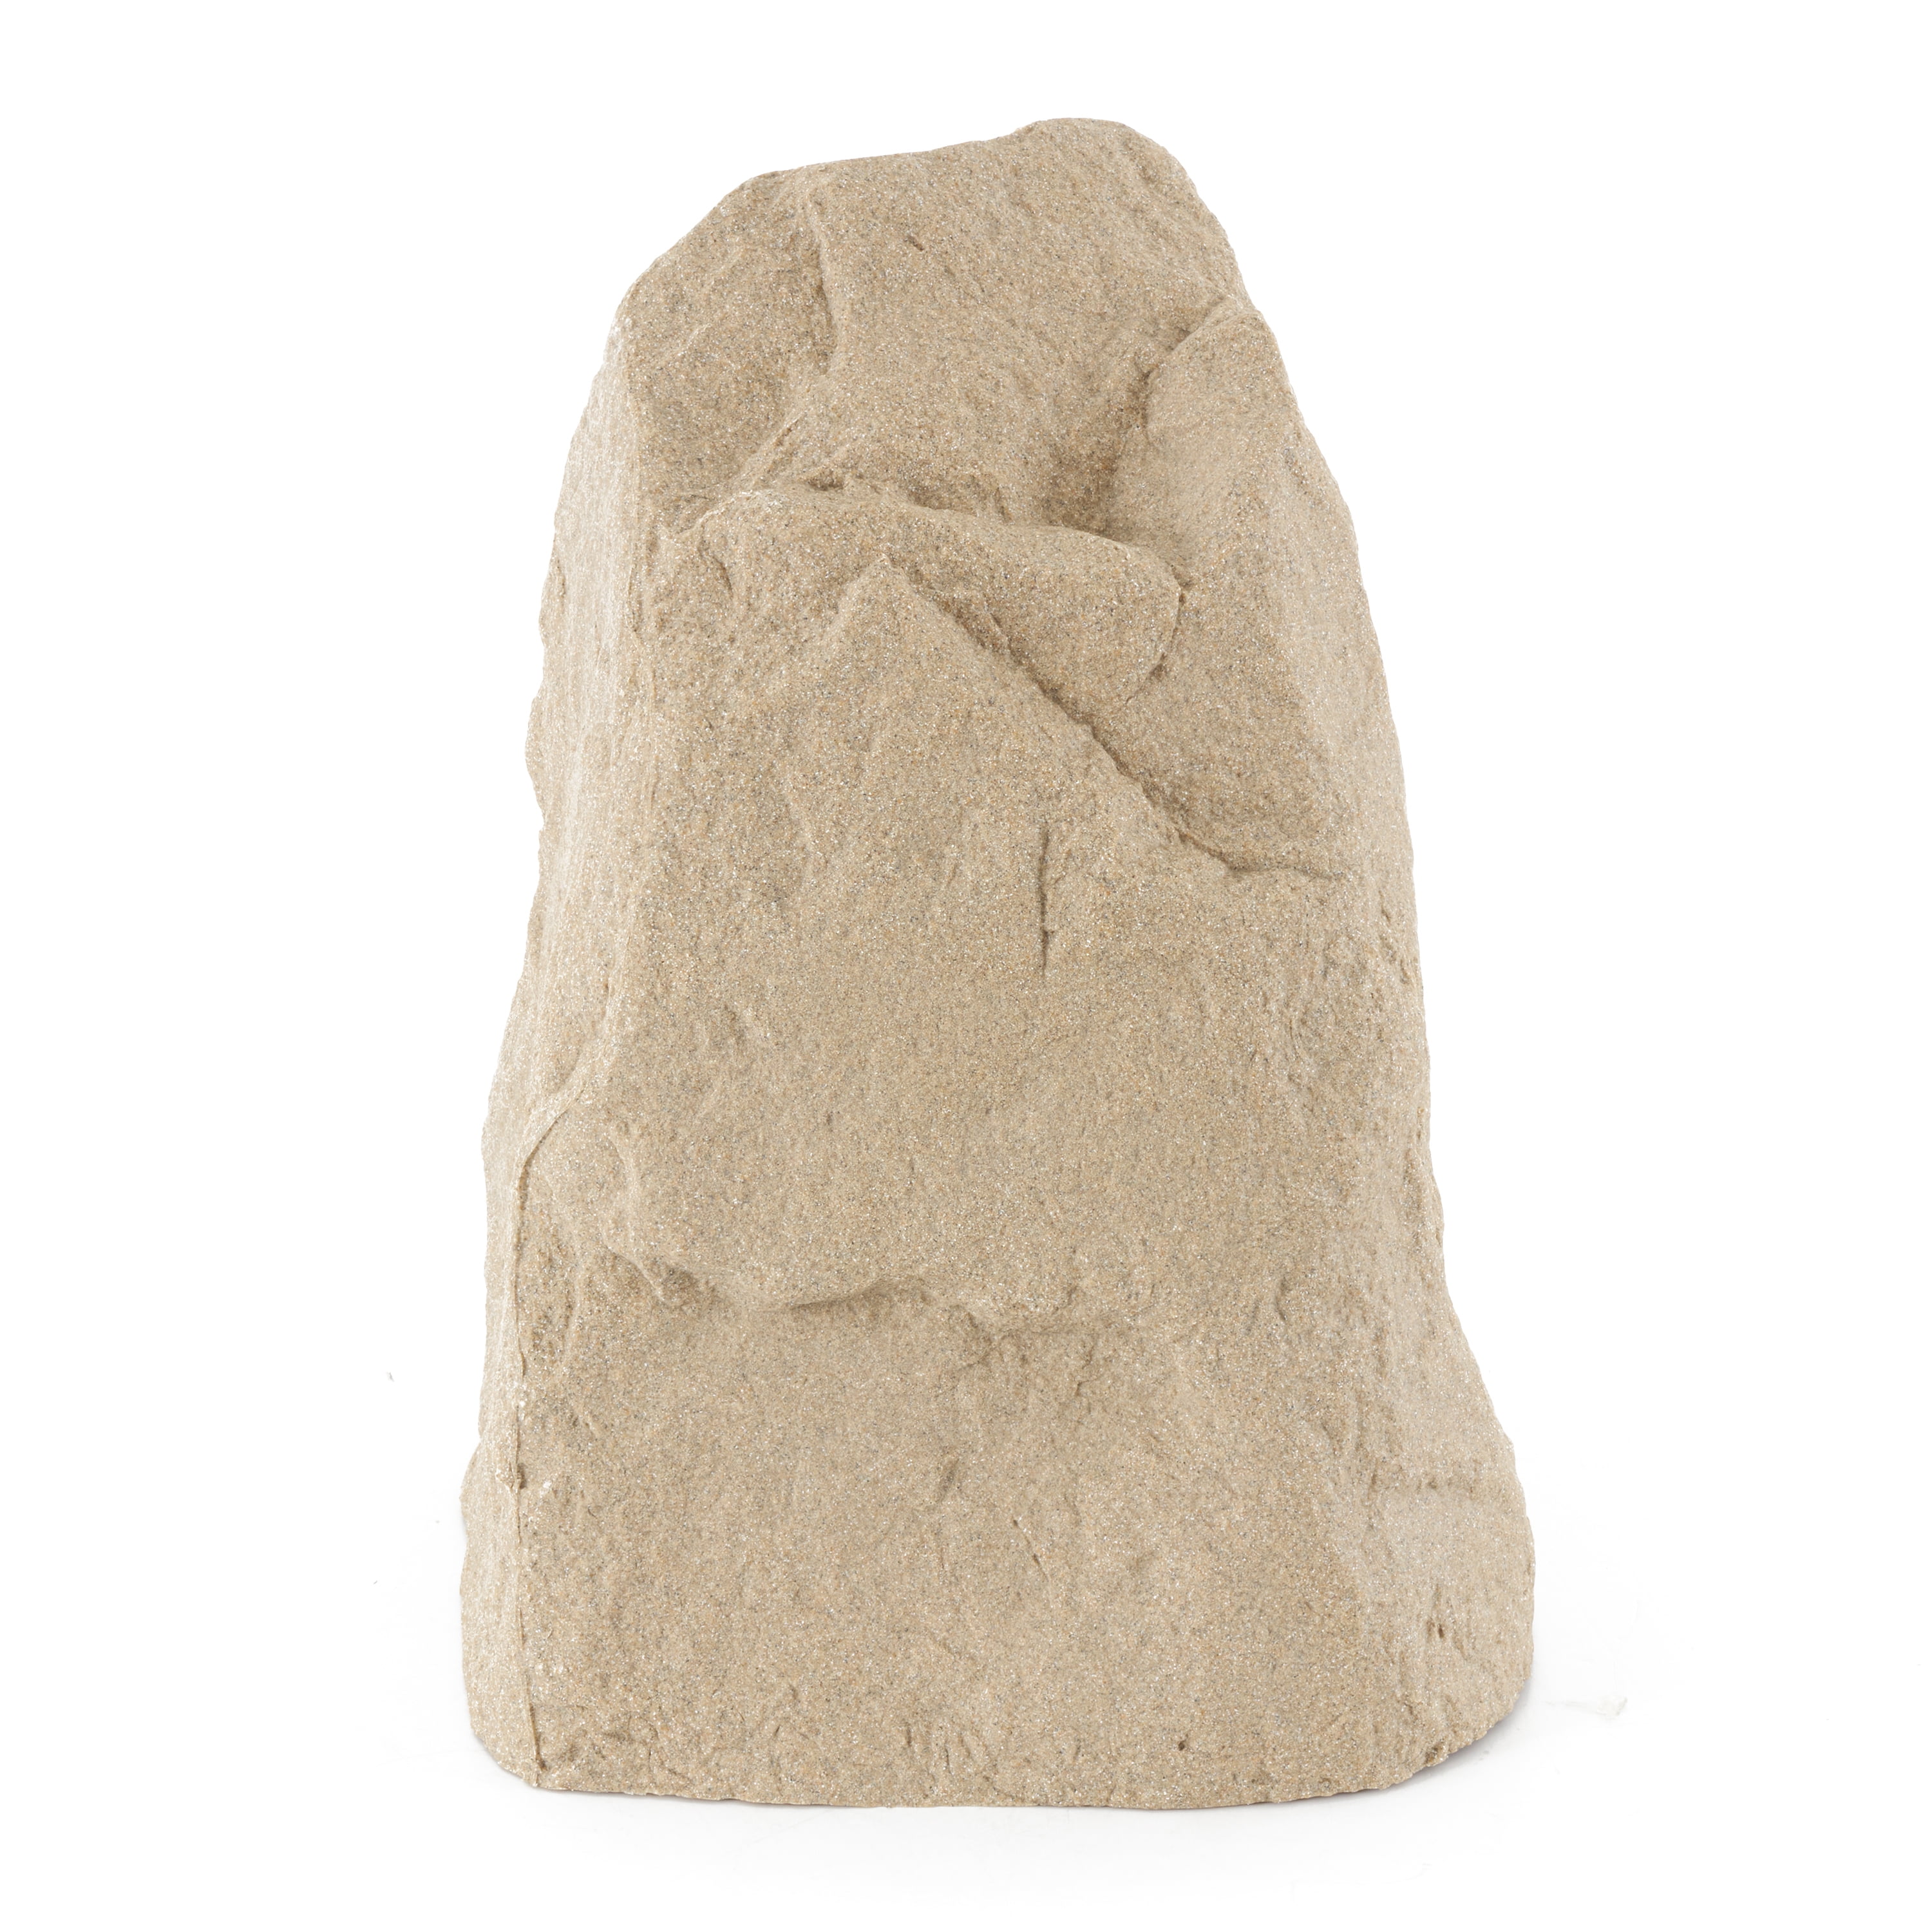 UPC 067151002314 product image for 00231 21.5 x 18 x 16 in. Receptacle Poly Rock Cover & Decorative Garden Accent,  | upcitemdb.com